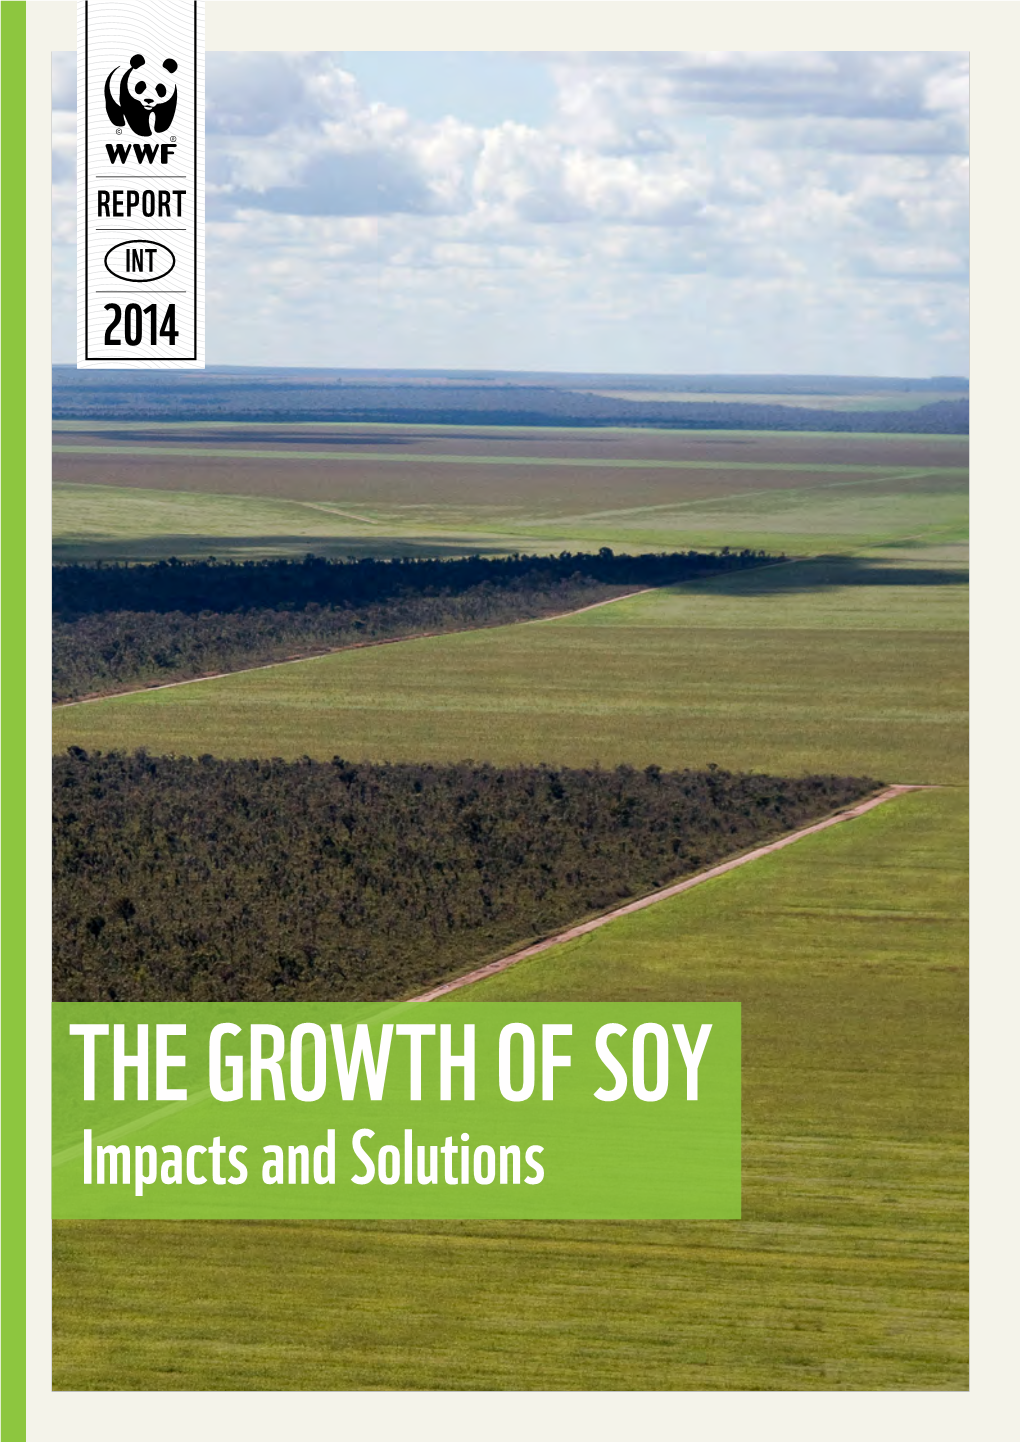 The Growth of Soy: Impacts and Solutions